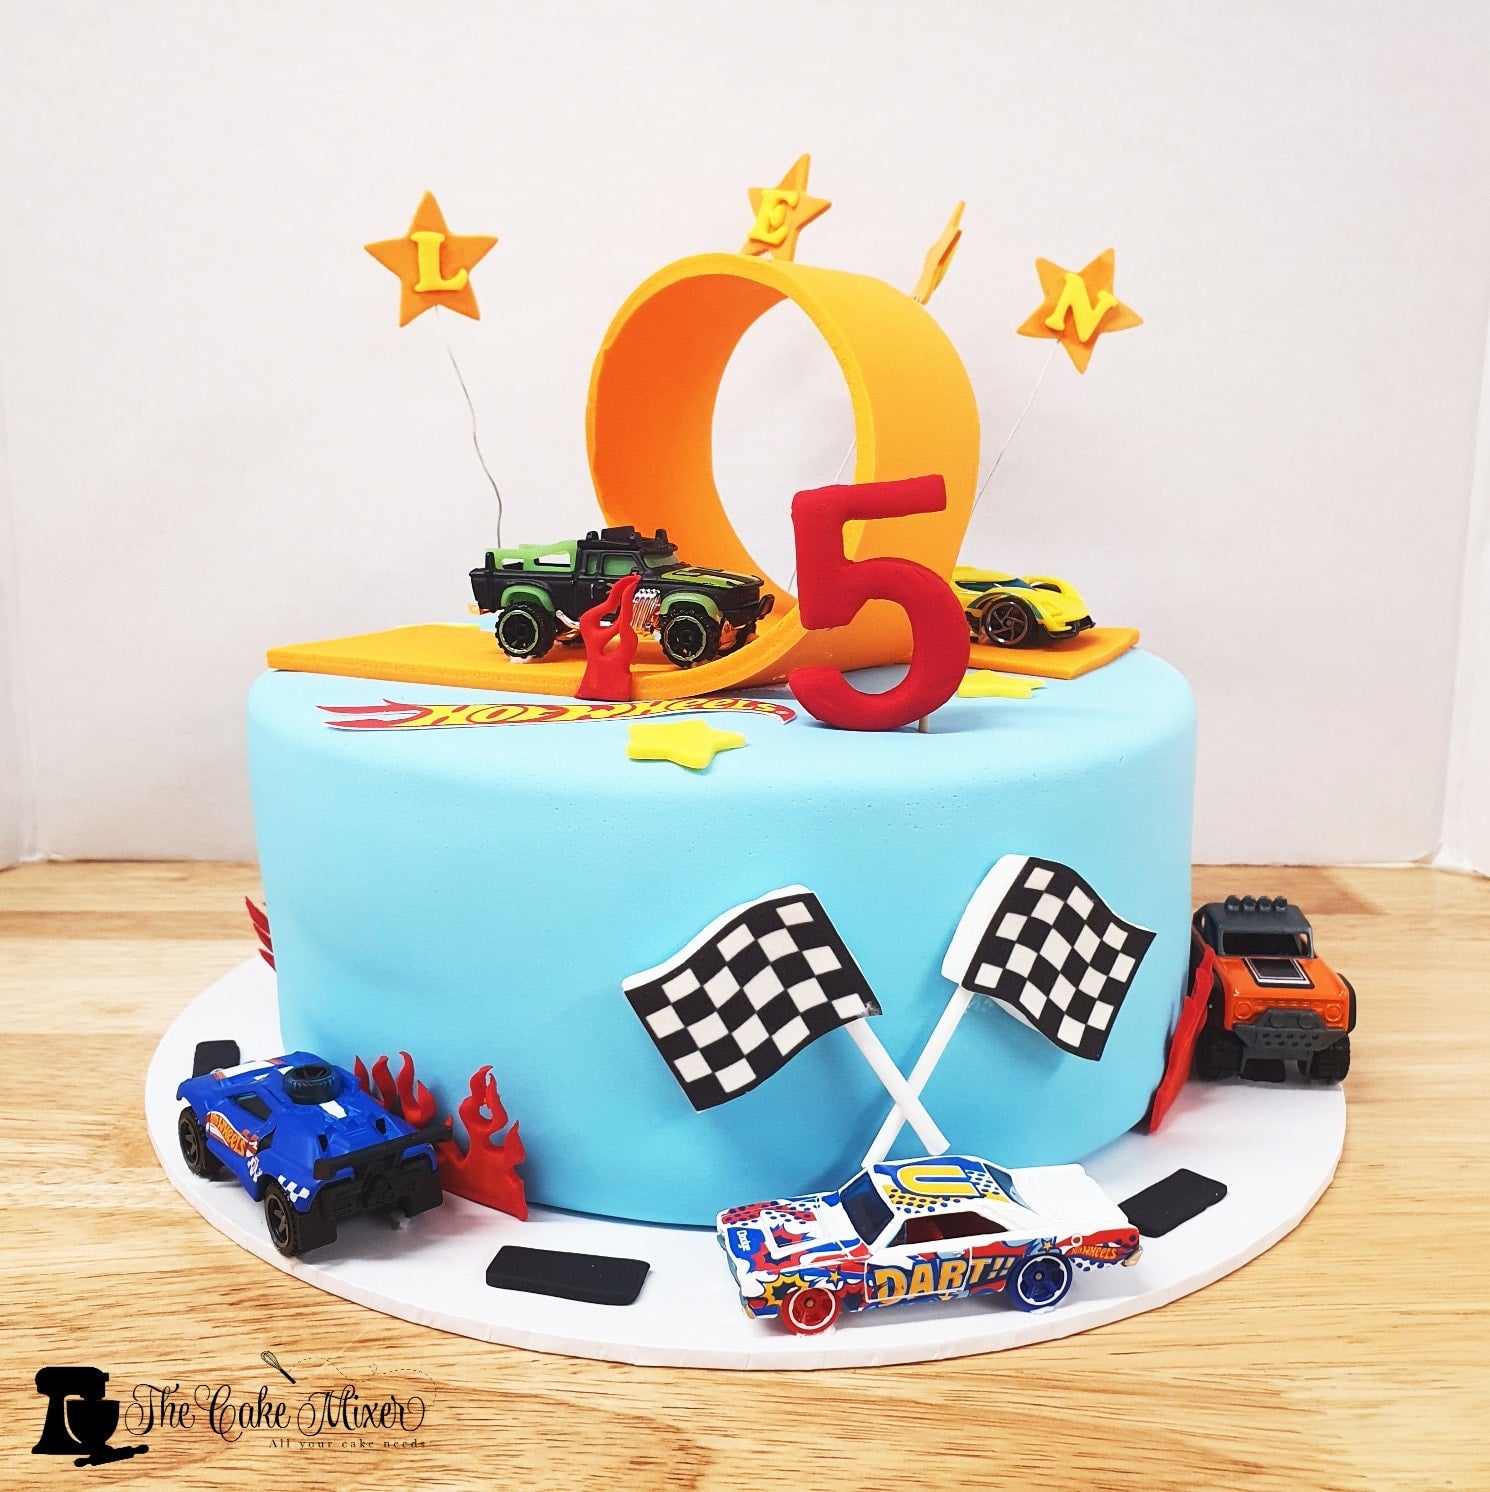 Amazoncom DecoSet Hot Wheels Drift Birthday Cake Decorations 2Piece  Topper with Race Car and 3D Racetrack Plaque Create ActionPacked Racing  Cakes for Birthdays and Parties  Toys  Games